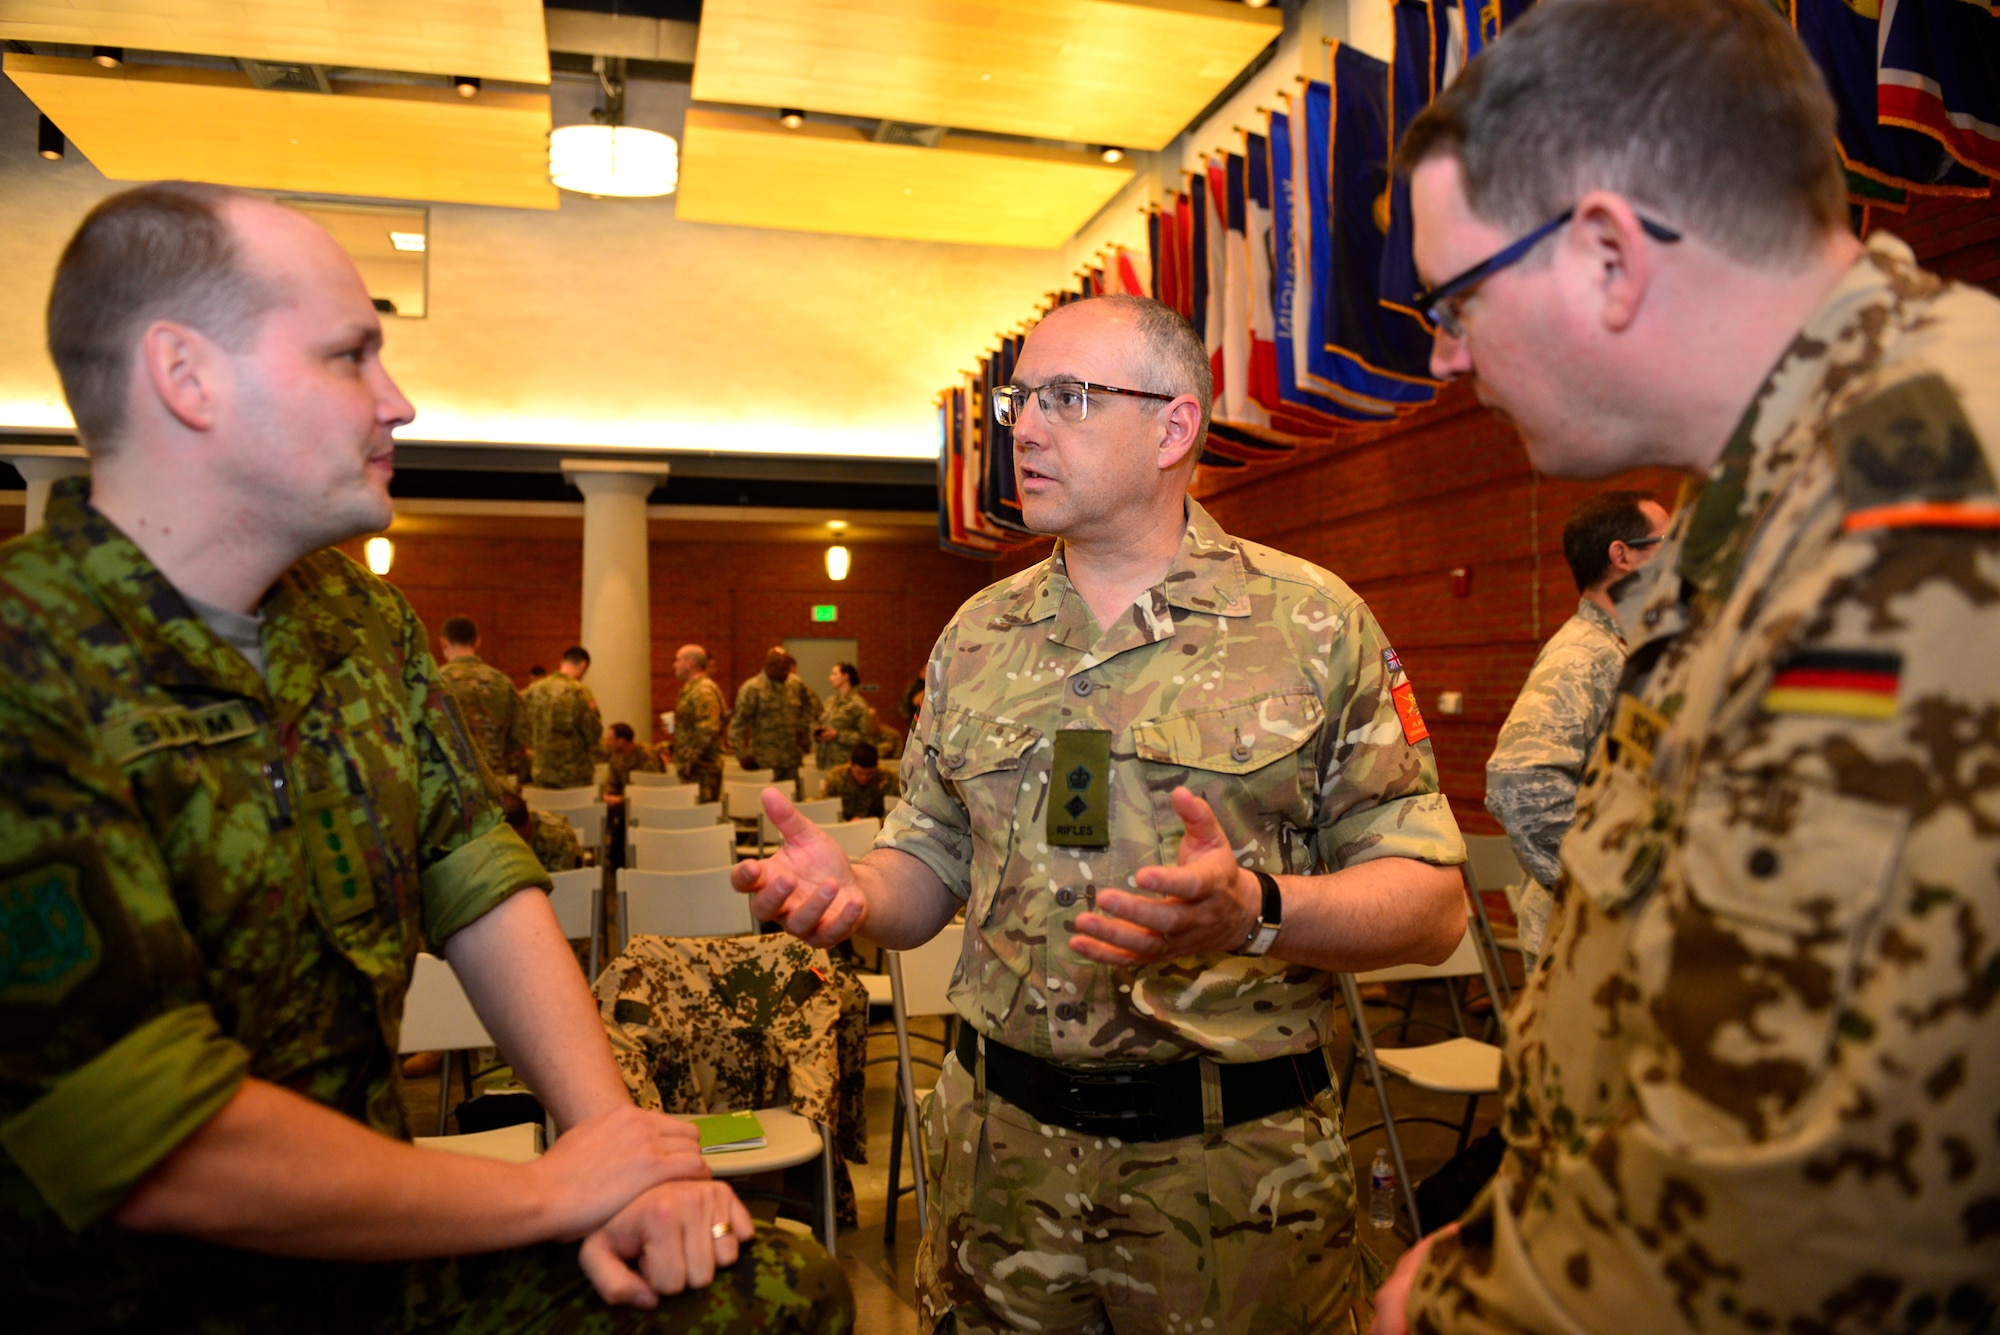 NEW ORLEANS -- United Kingdom Army Reserve Lt Col John Skiros, center, speaks with Estonian Army Capt Tony Sonum, left, and German Army Lt Col Axel Schmidt about the Military Reserve Exchange Program during a conference break. U.S. military members from around the nation gathered at Jackson Barracks in New Orleans today for an informational meeting about the Military Reserve Exchange Program. (U.S. Navy Photo by Chief Mass Communication Specialist Roger S. Duncan)